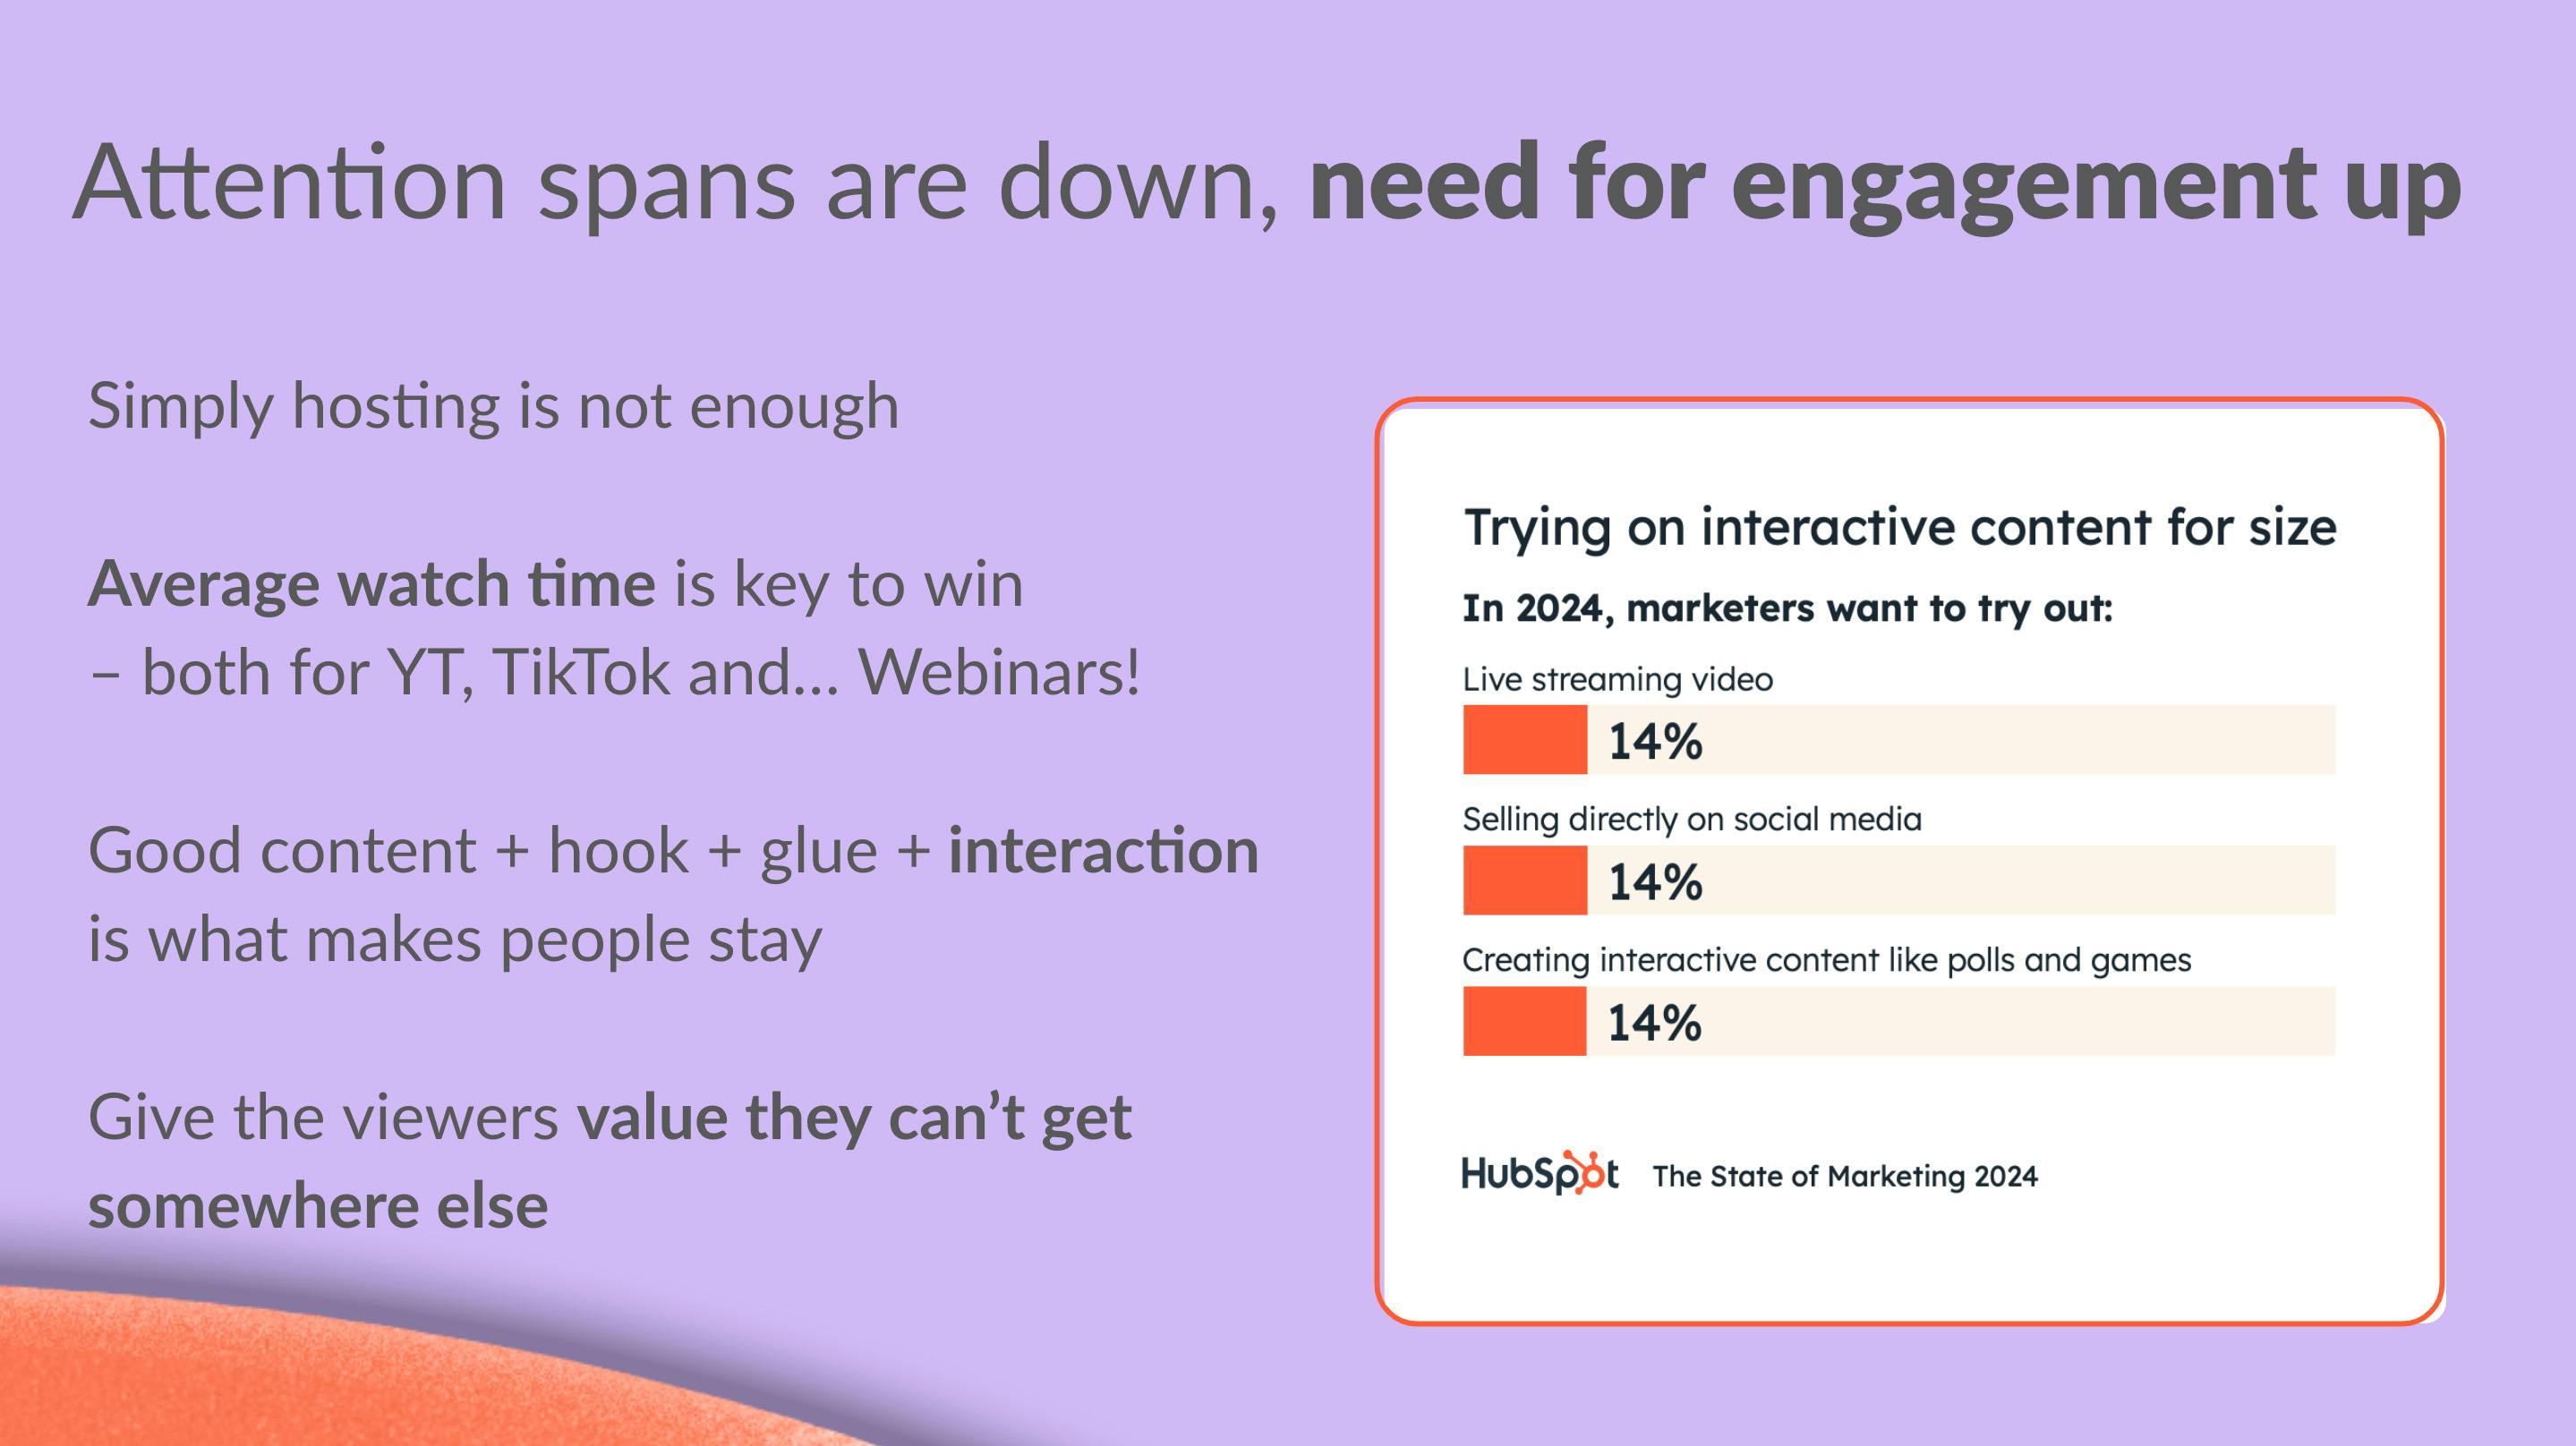 Attention spans are down and need for engagement up - Video marketing